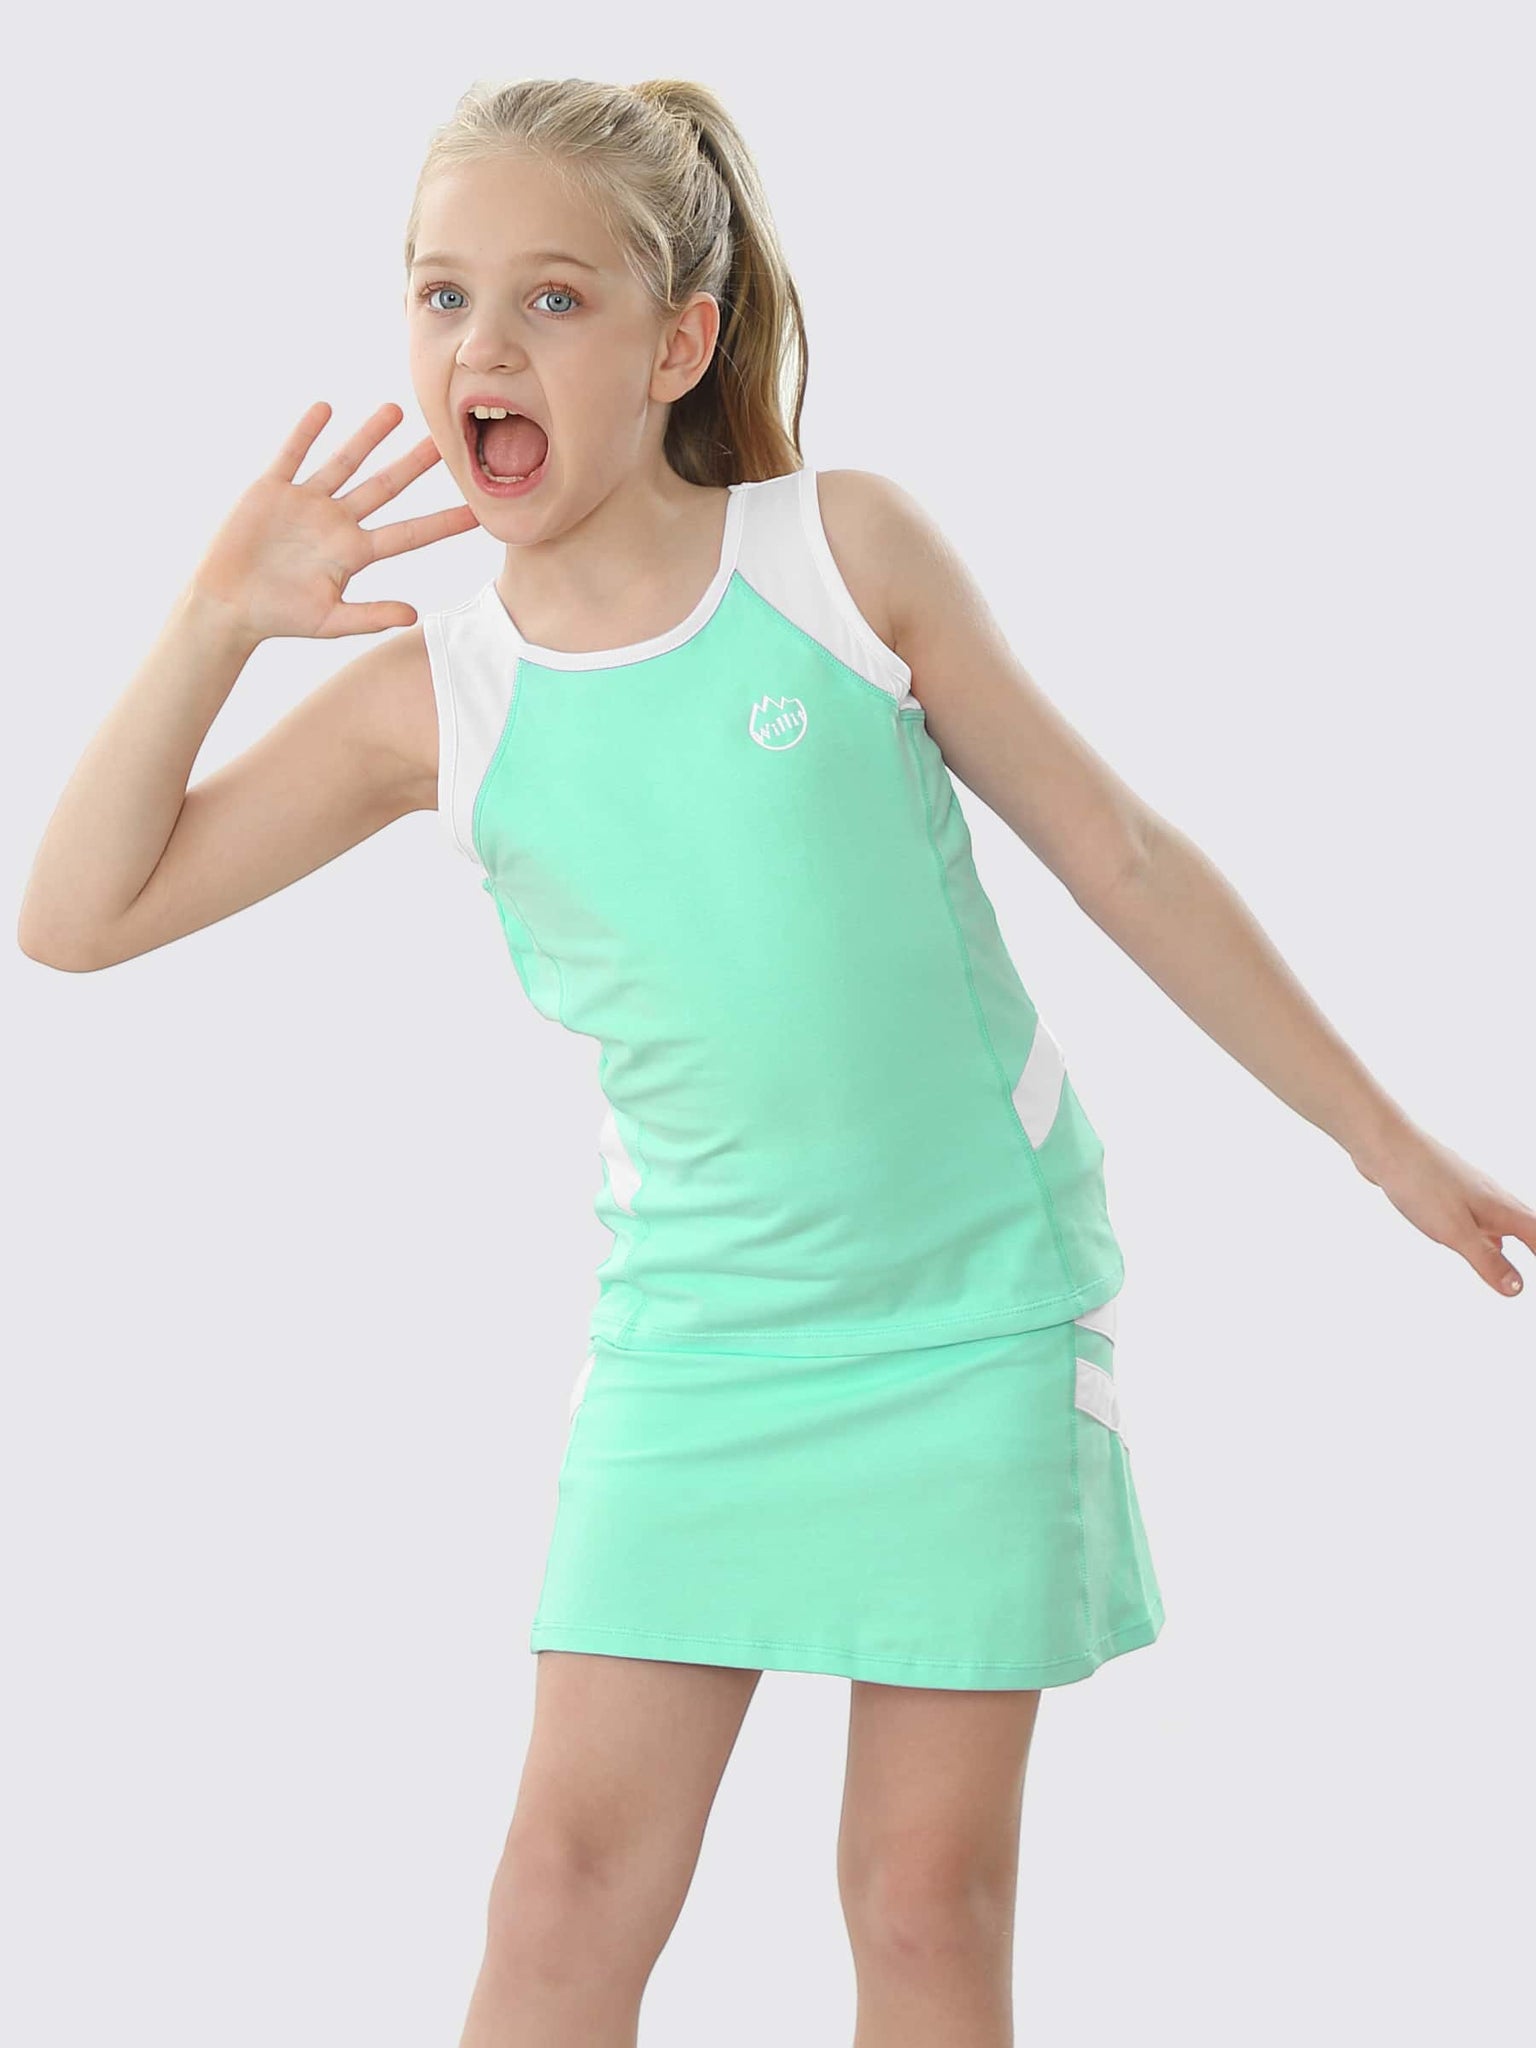 Willit Girls' Tennis Outfit_Green_model1